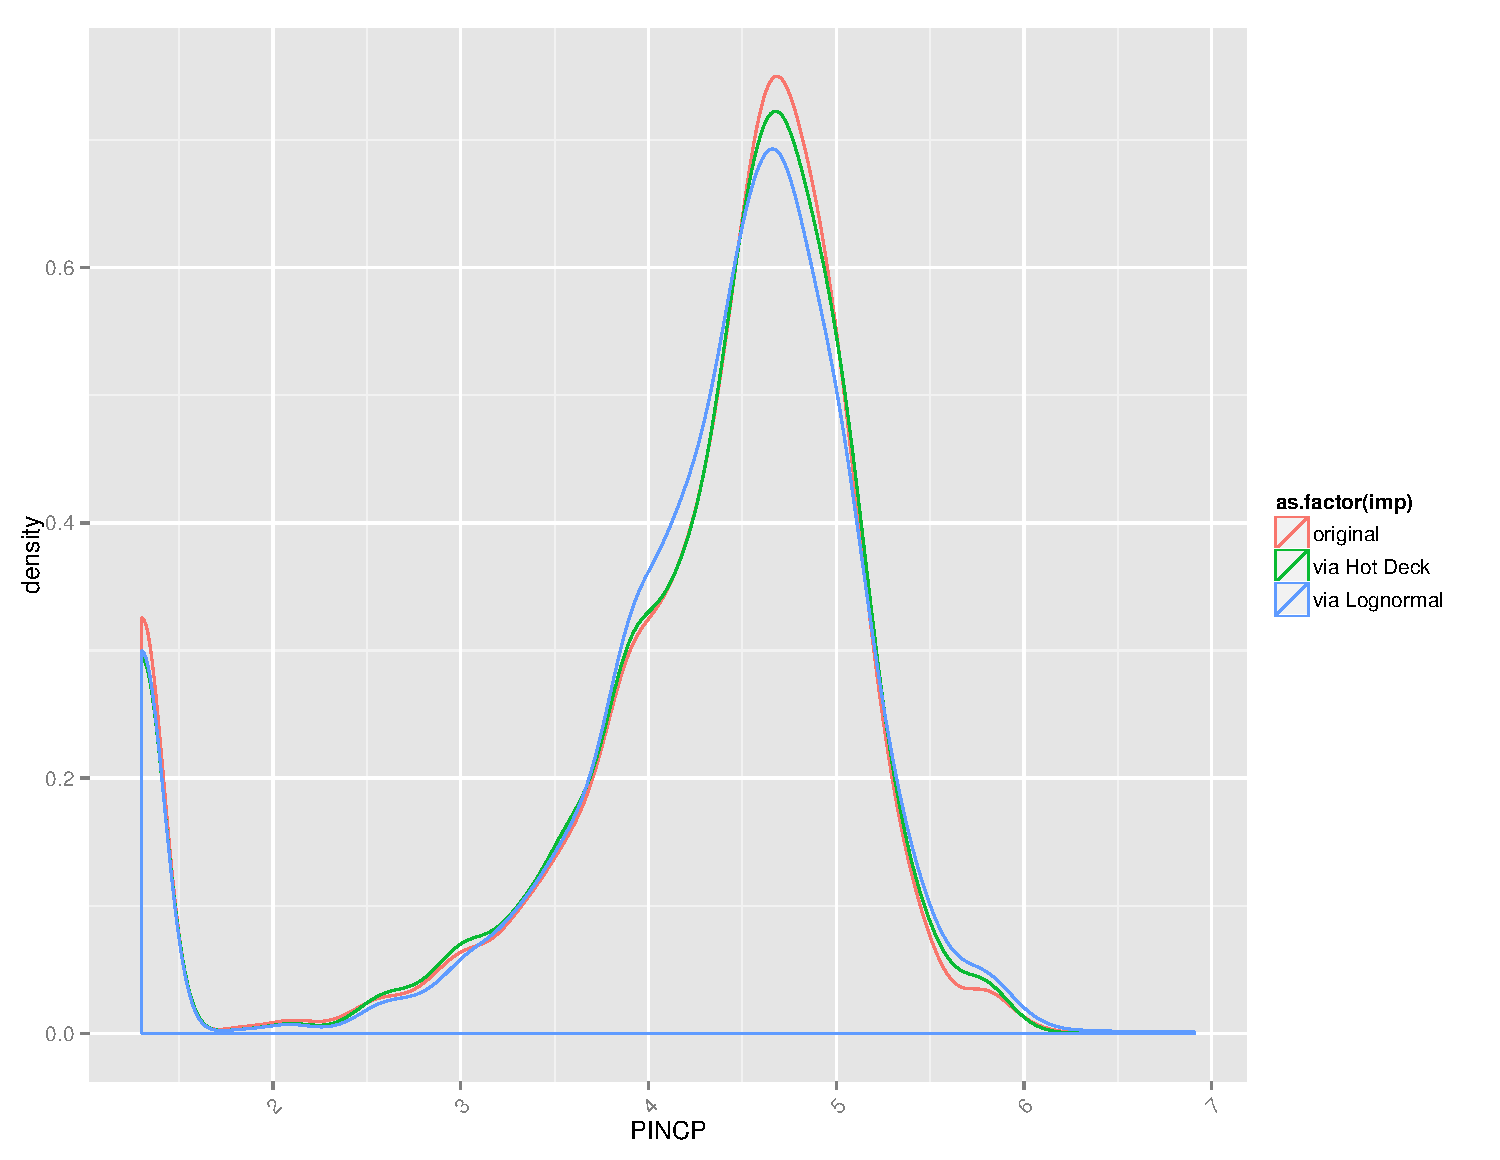 Log wages from the data and imputed using Hot Deck and a Normal distribution.